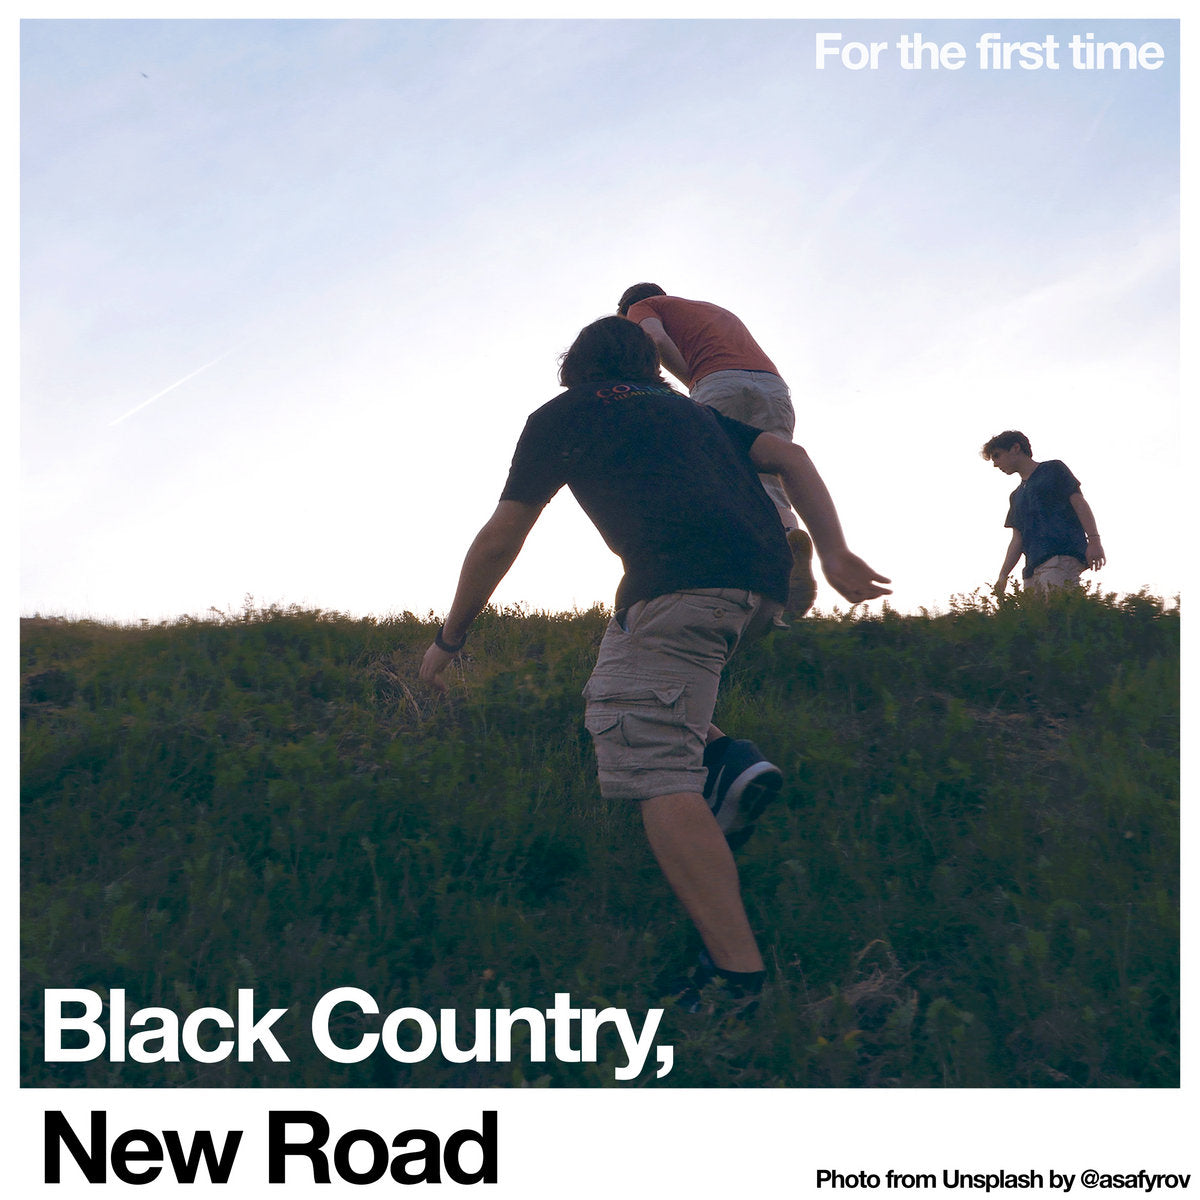 Black Country, New Road "For the First Time"